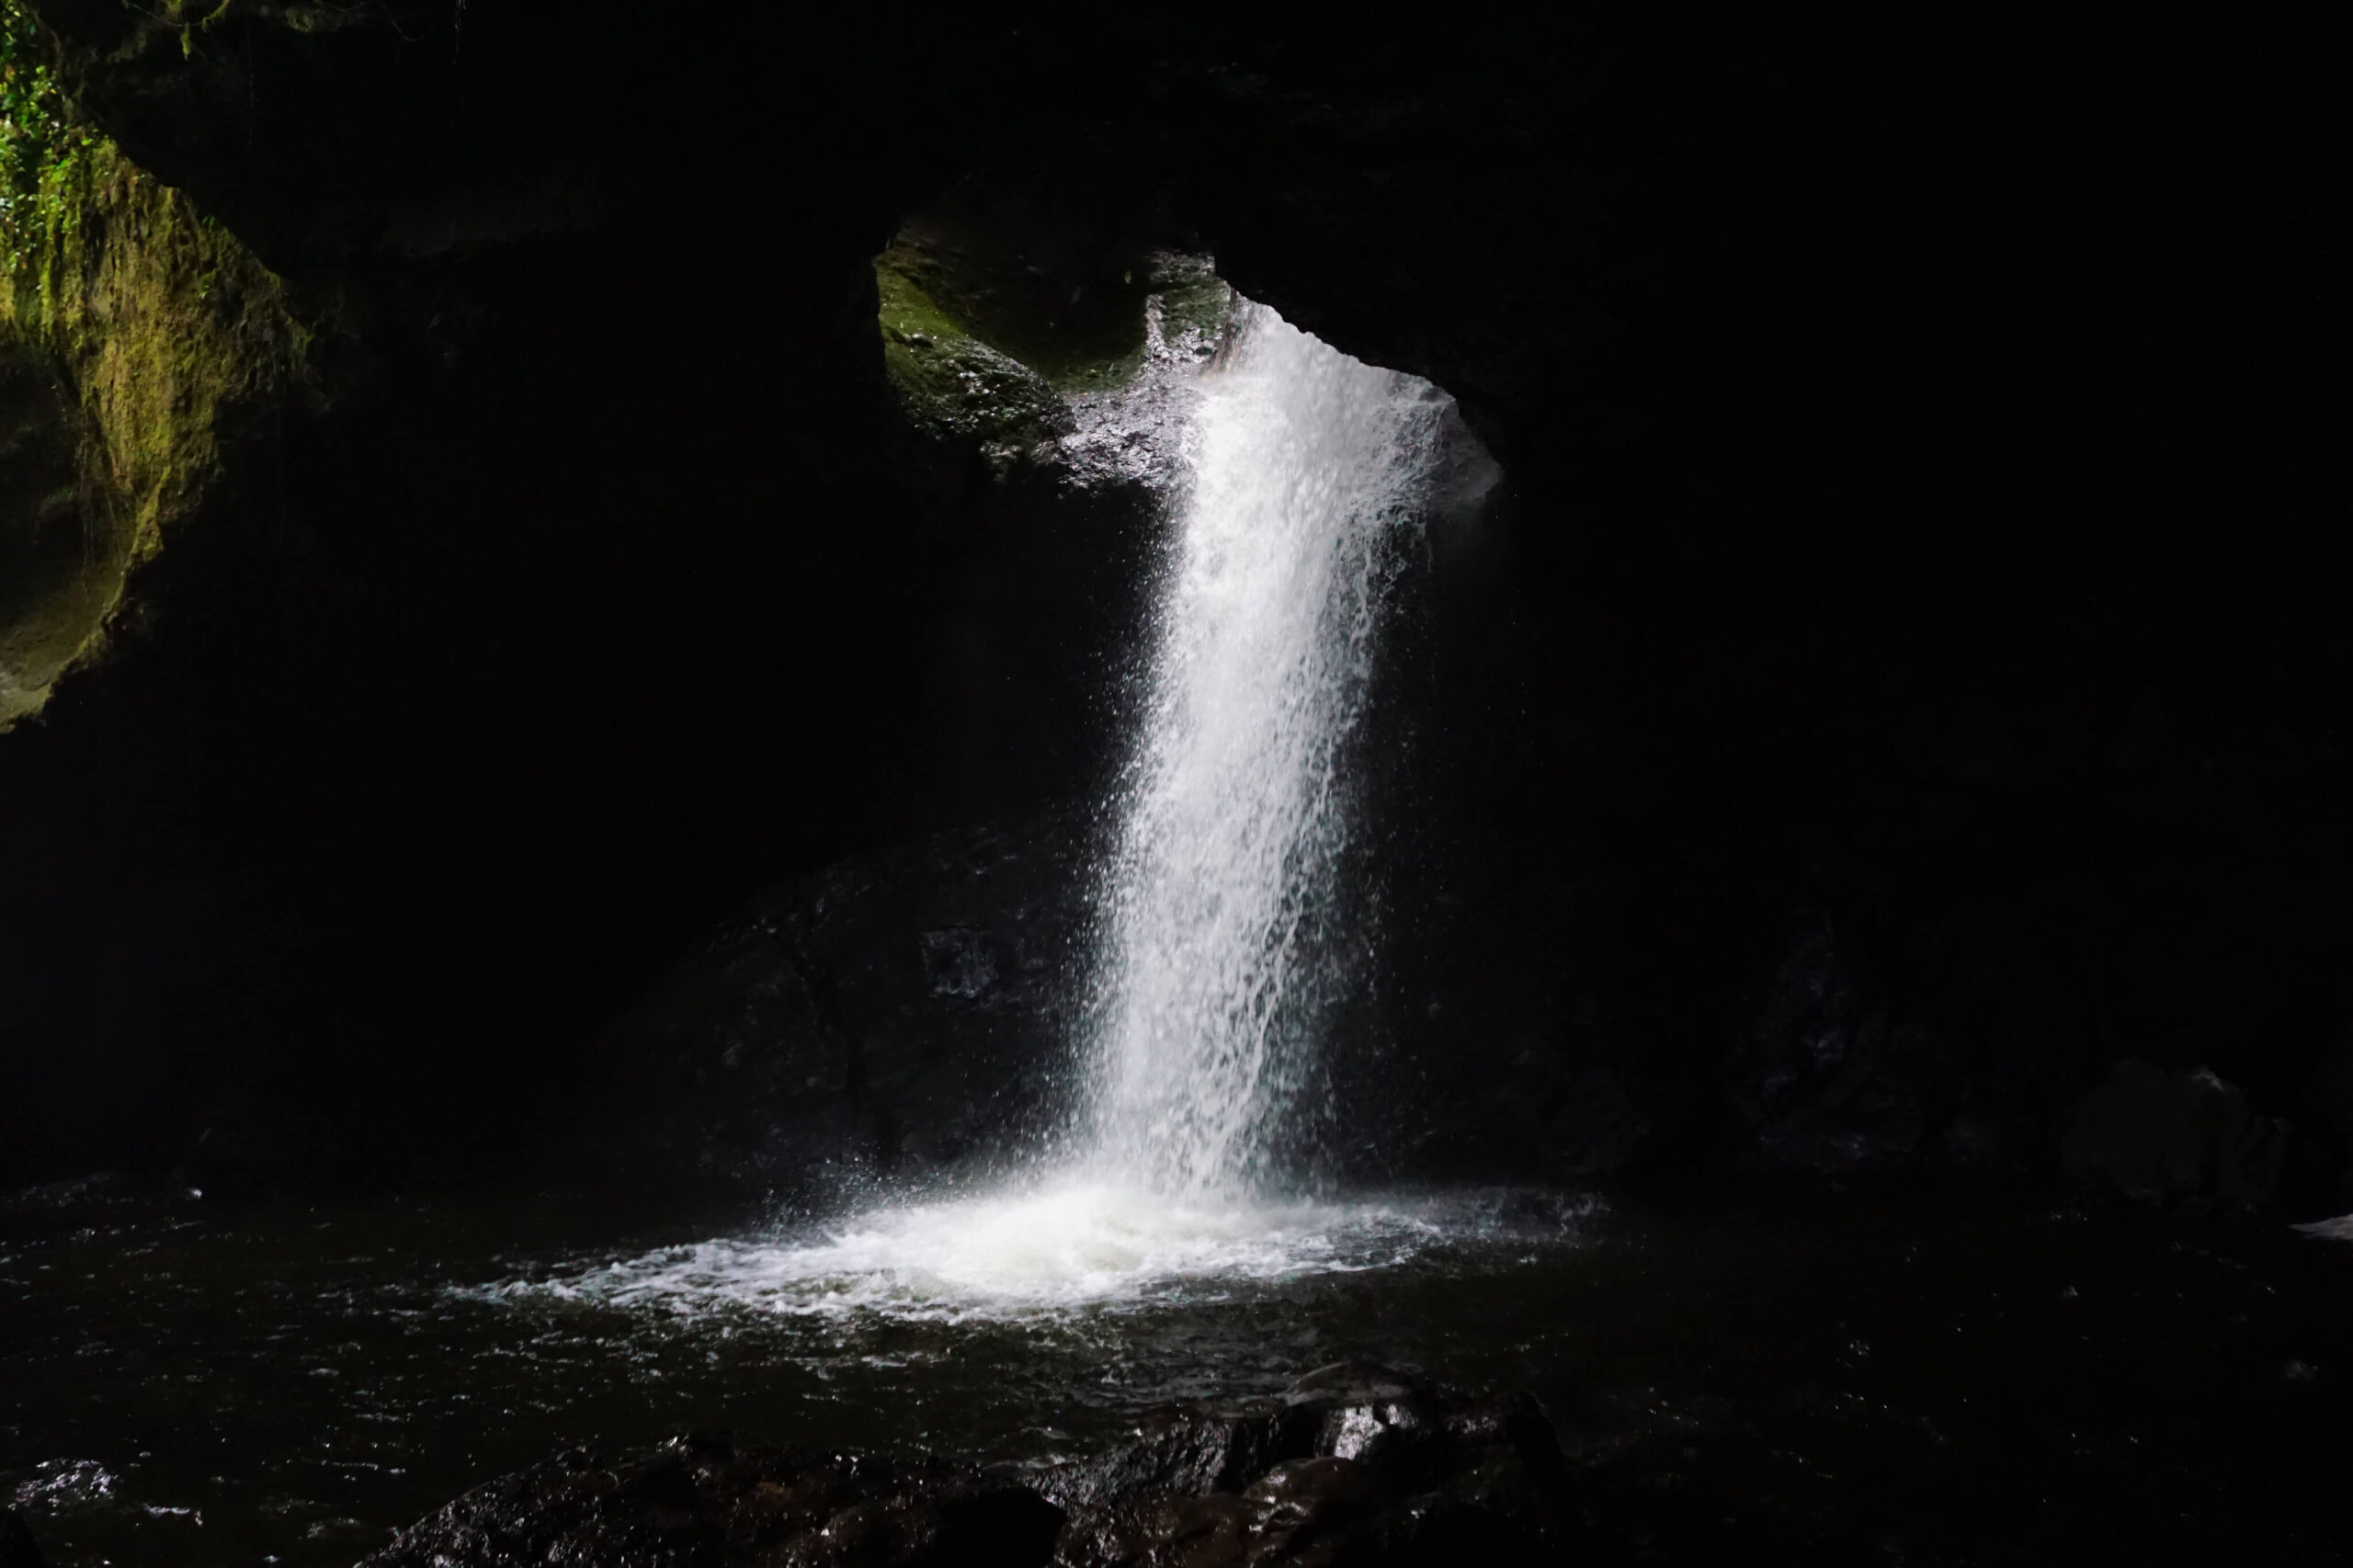 Cueva Del Esplendor, a waterfall flowing through the roof of a dark cave into the pool below.